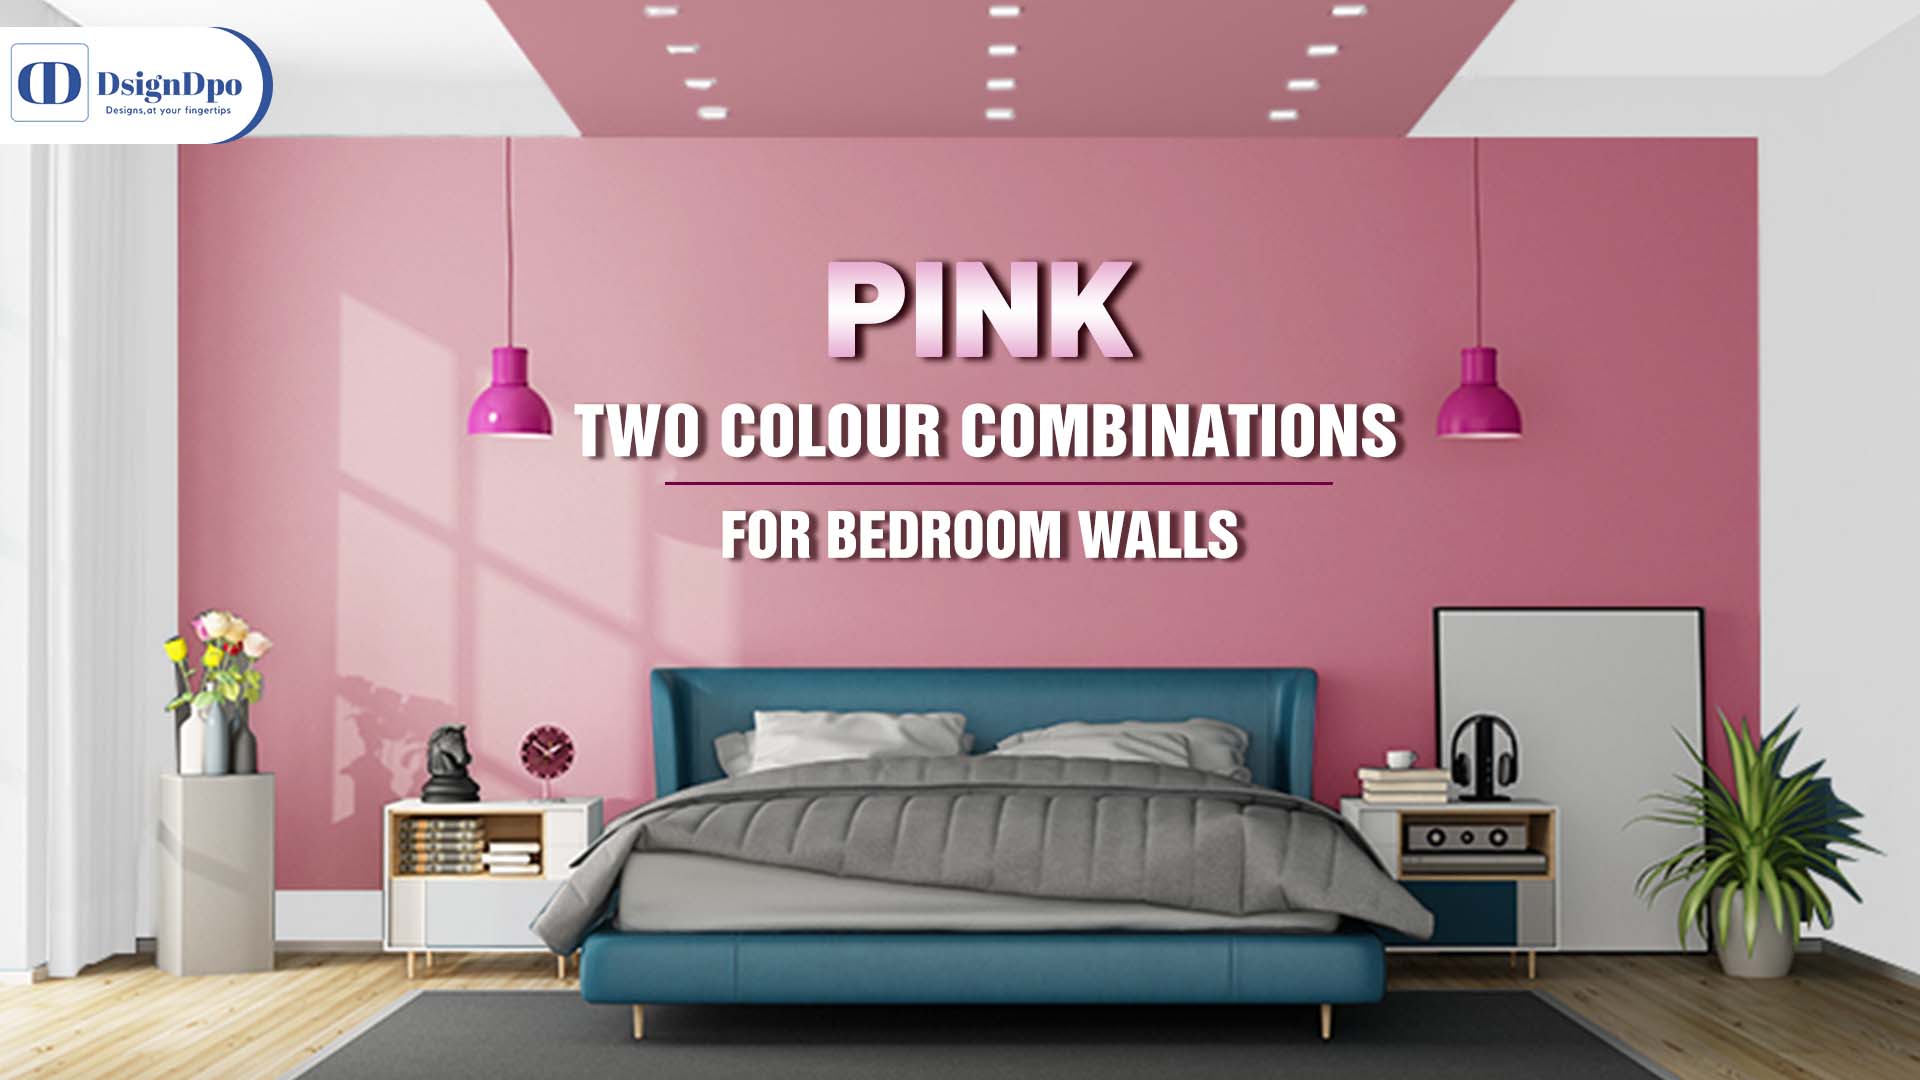 Bedroom Colors | The Best Options For Your Home In 2021 - Décor Aid